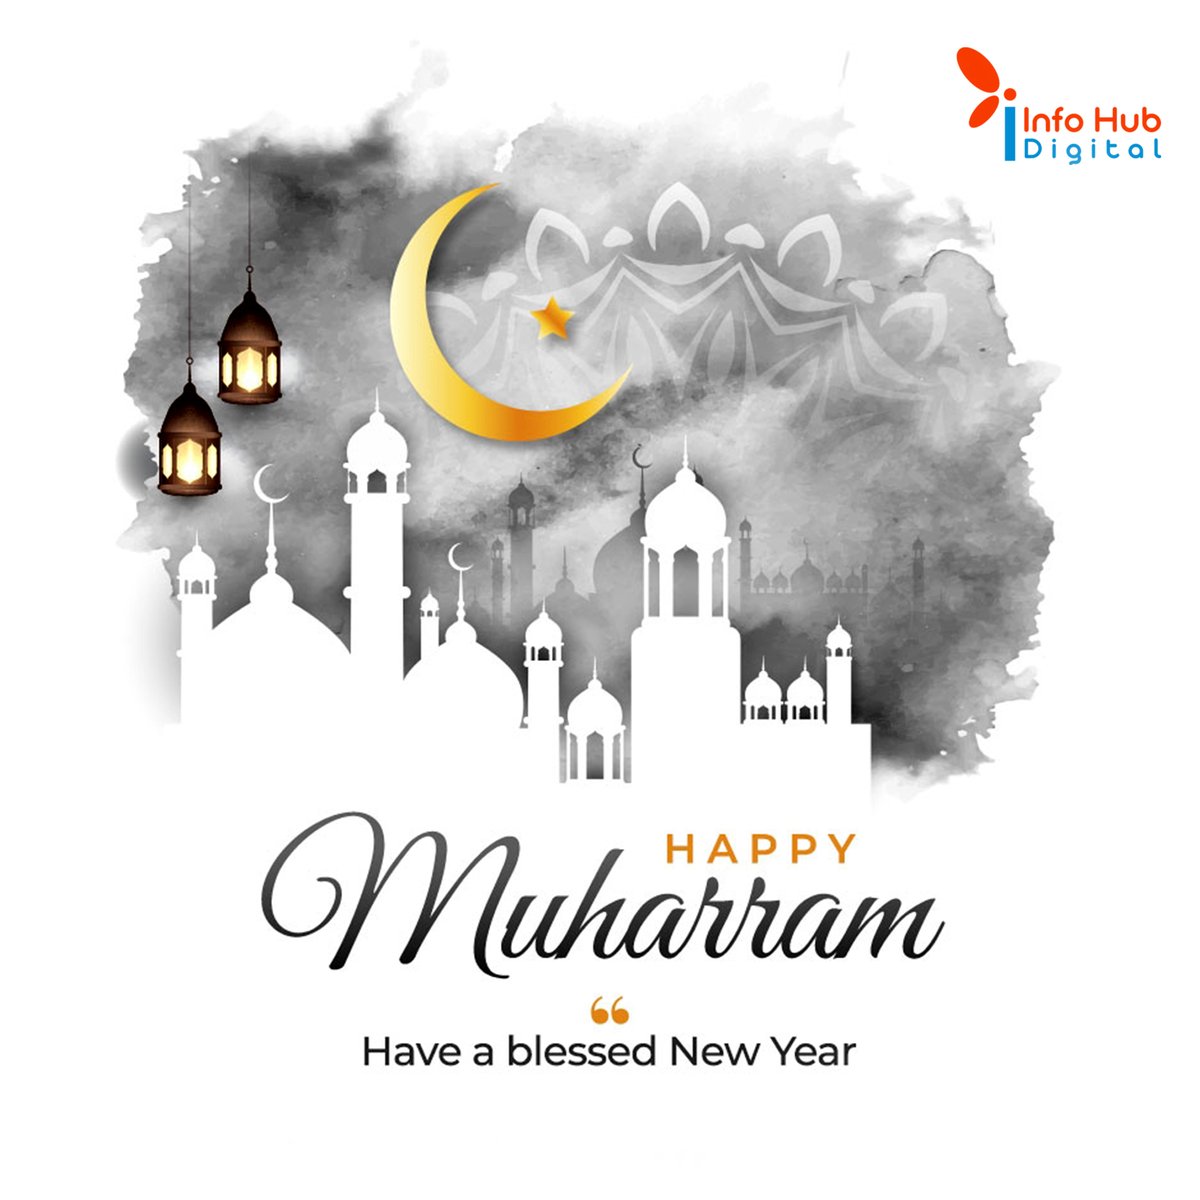 May the blessings of Muharram fill your life with peace, prosperity, and happiness. Wishing you a blessed month ahead.

#HappyMuharram #IslamicNewYear #MuharramBlessings #SpiritualJourney #ReflectAndRemember #MuharramReflections #NewBeginnings #Muharram2023 #EmbraceCompassion